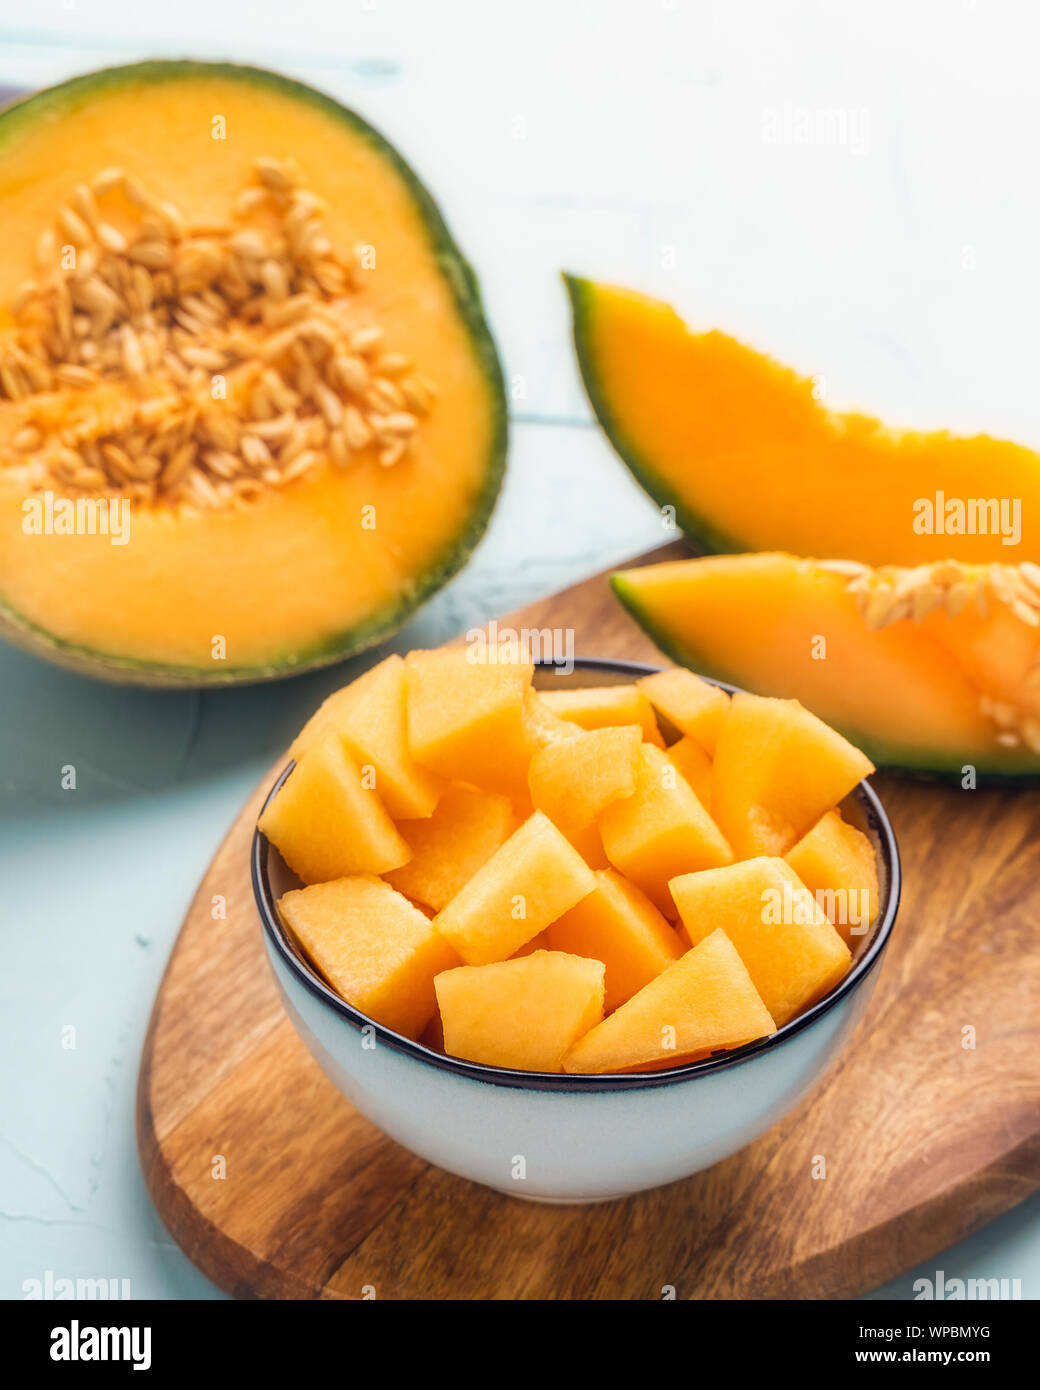 Fresh melon ready to eat vertical composition displayed on a bowl. Summer fruit food. Stock Photo